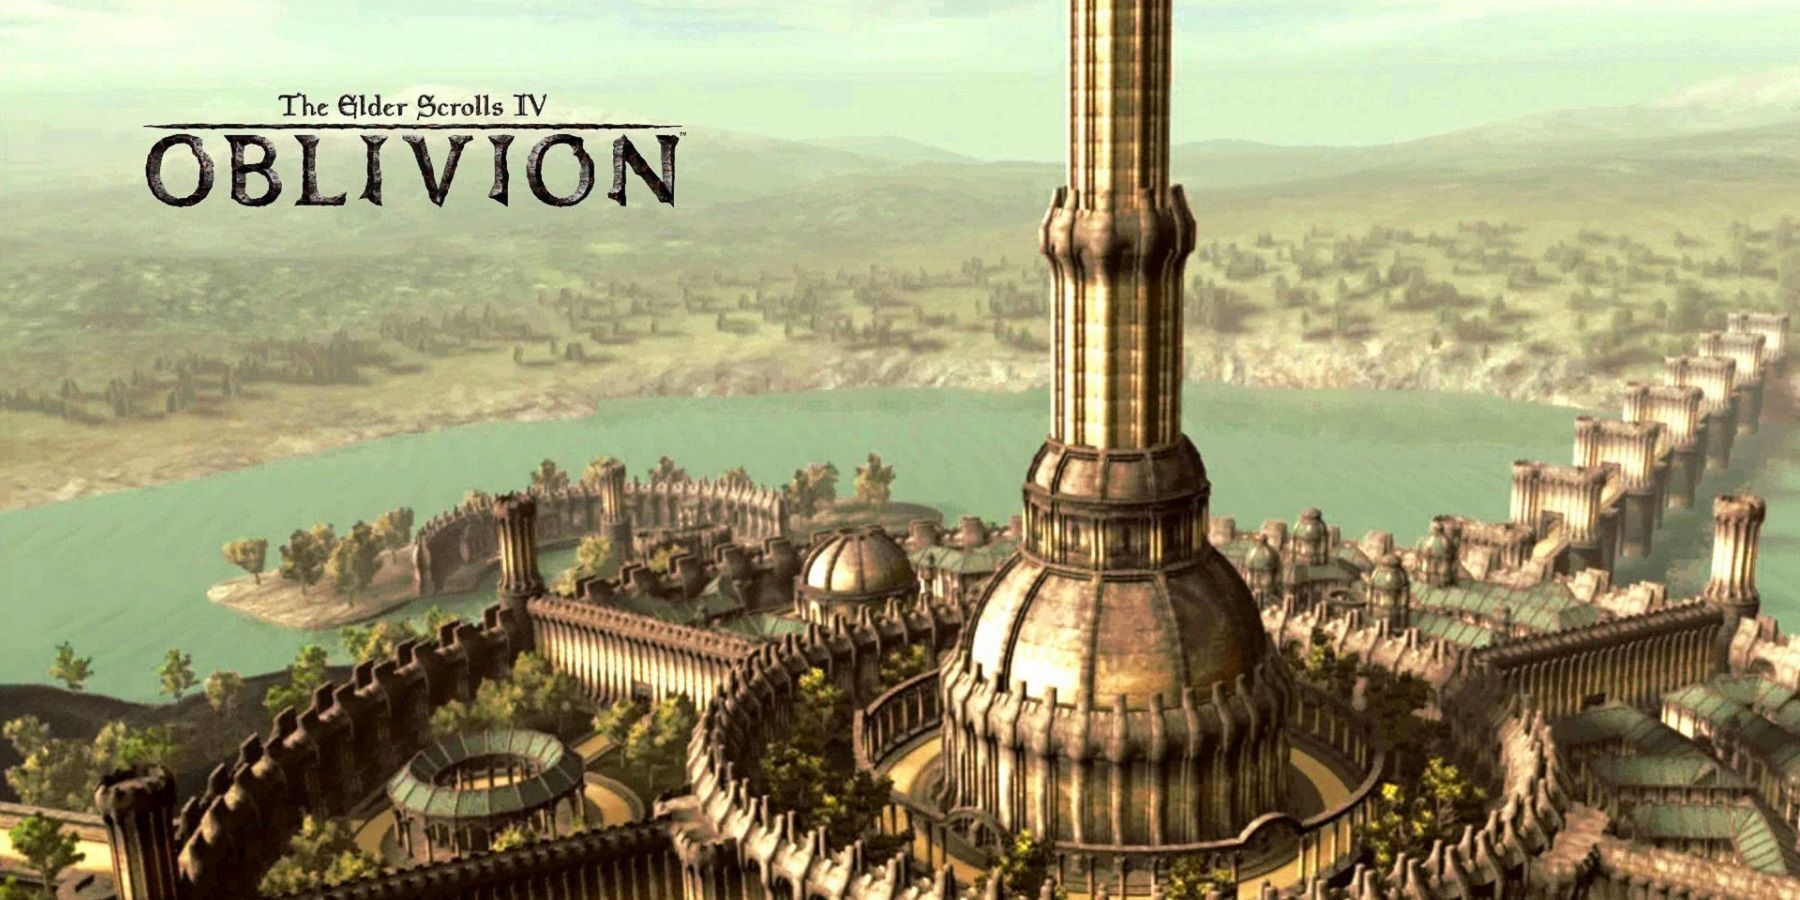 Artwork showing the Imperial City tower from Elder Scrolls 4: Oblivion.